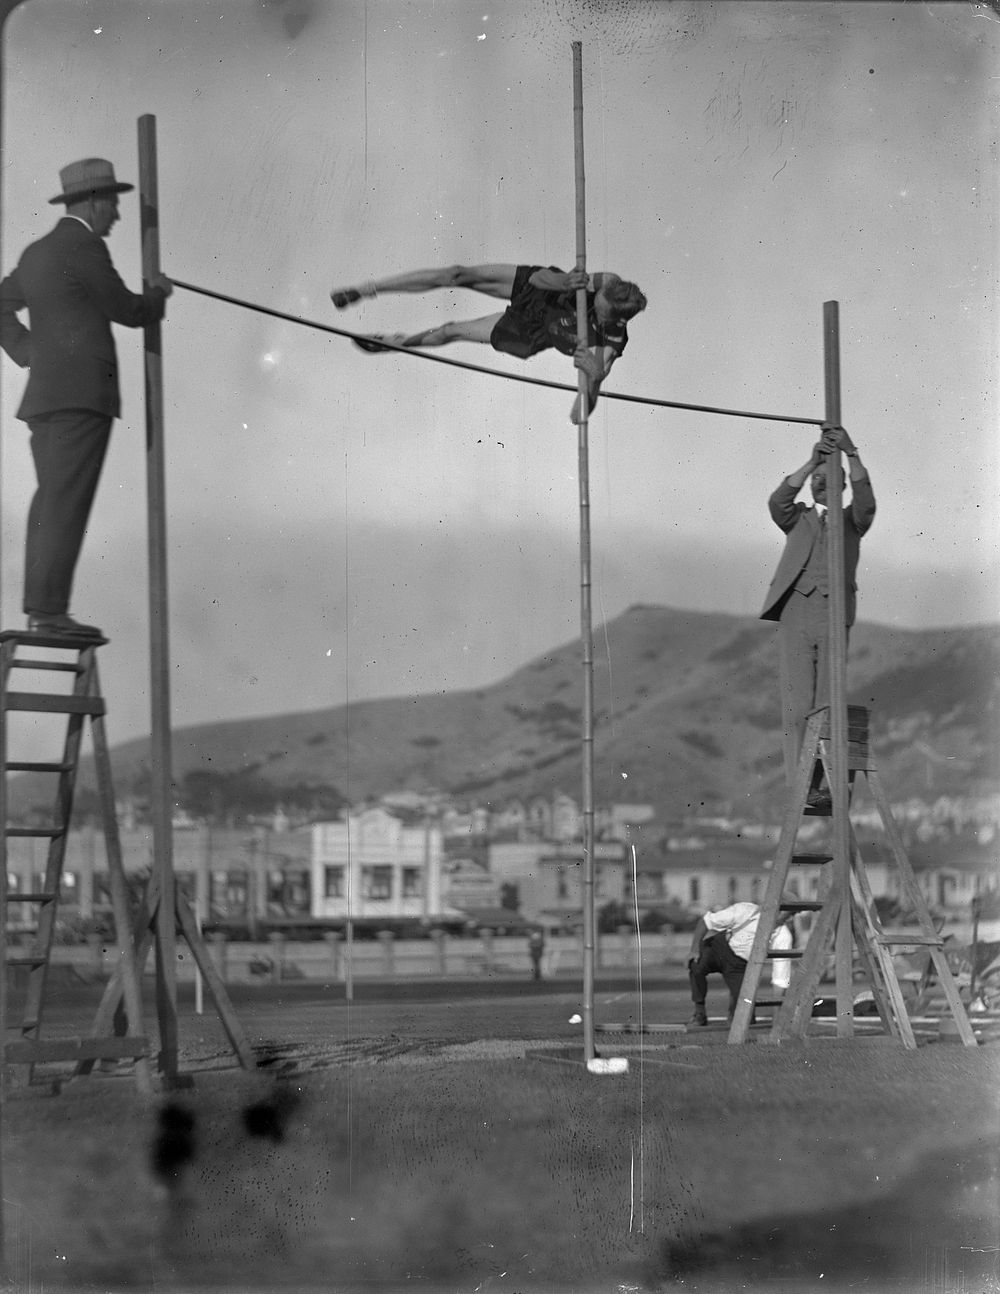 Pole vaulter (1929) by Crystal Photographic House.